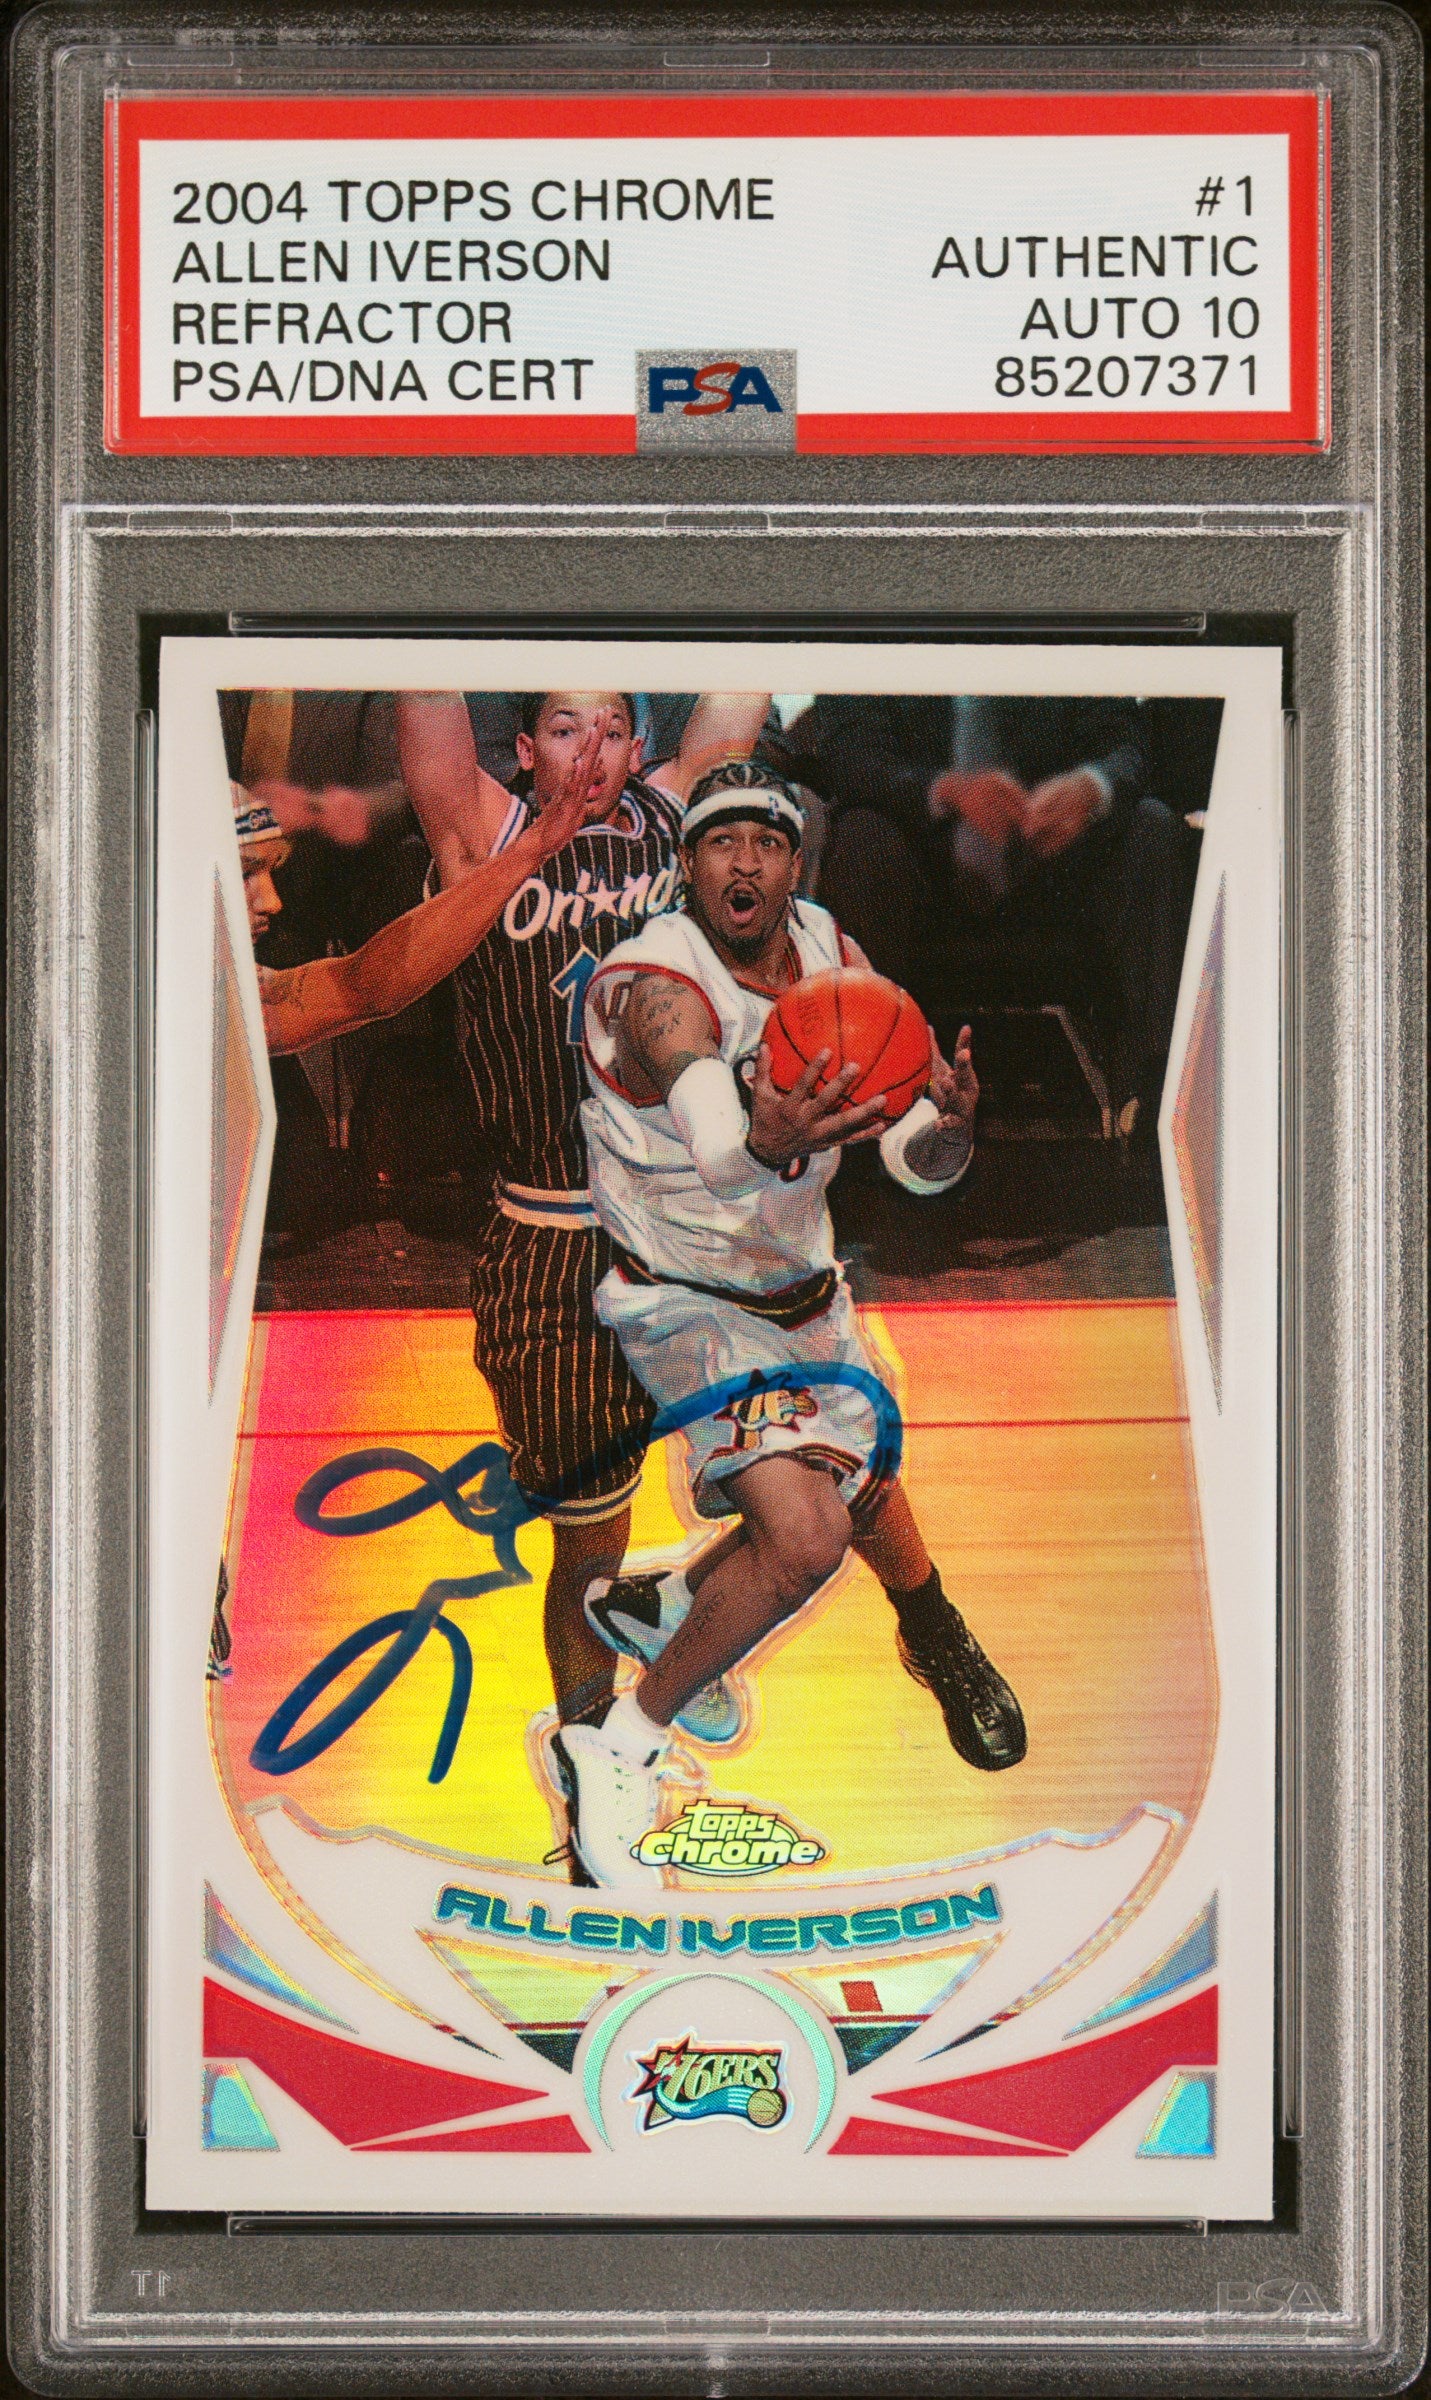 Allen Iverson 2004 Topps Chrome Refractor Signed Card #1 Auto Graded PSA 10 7371